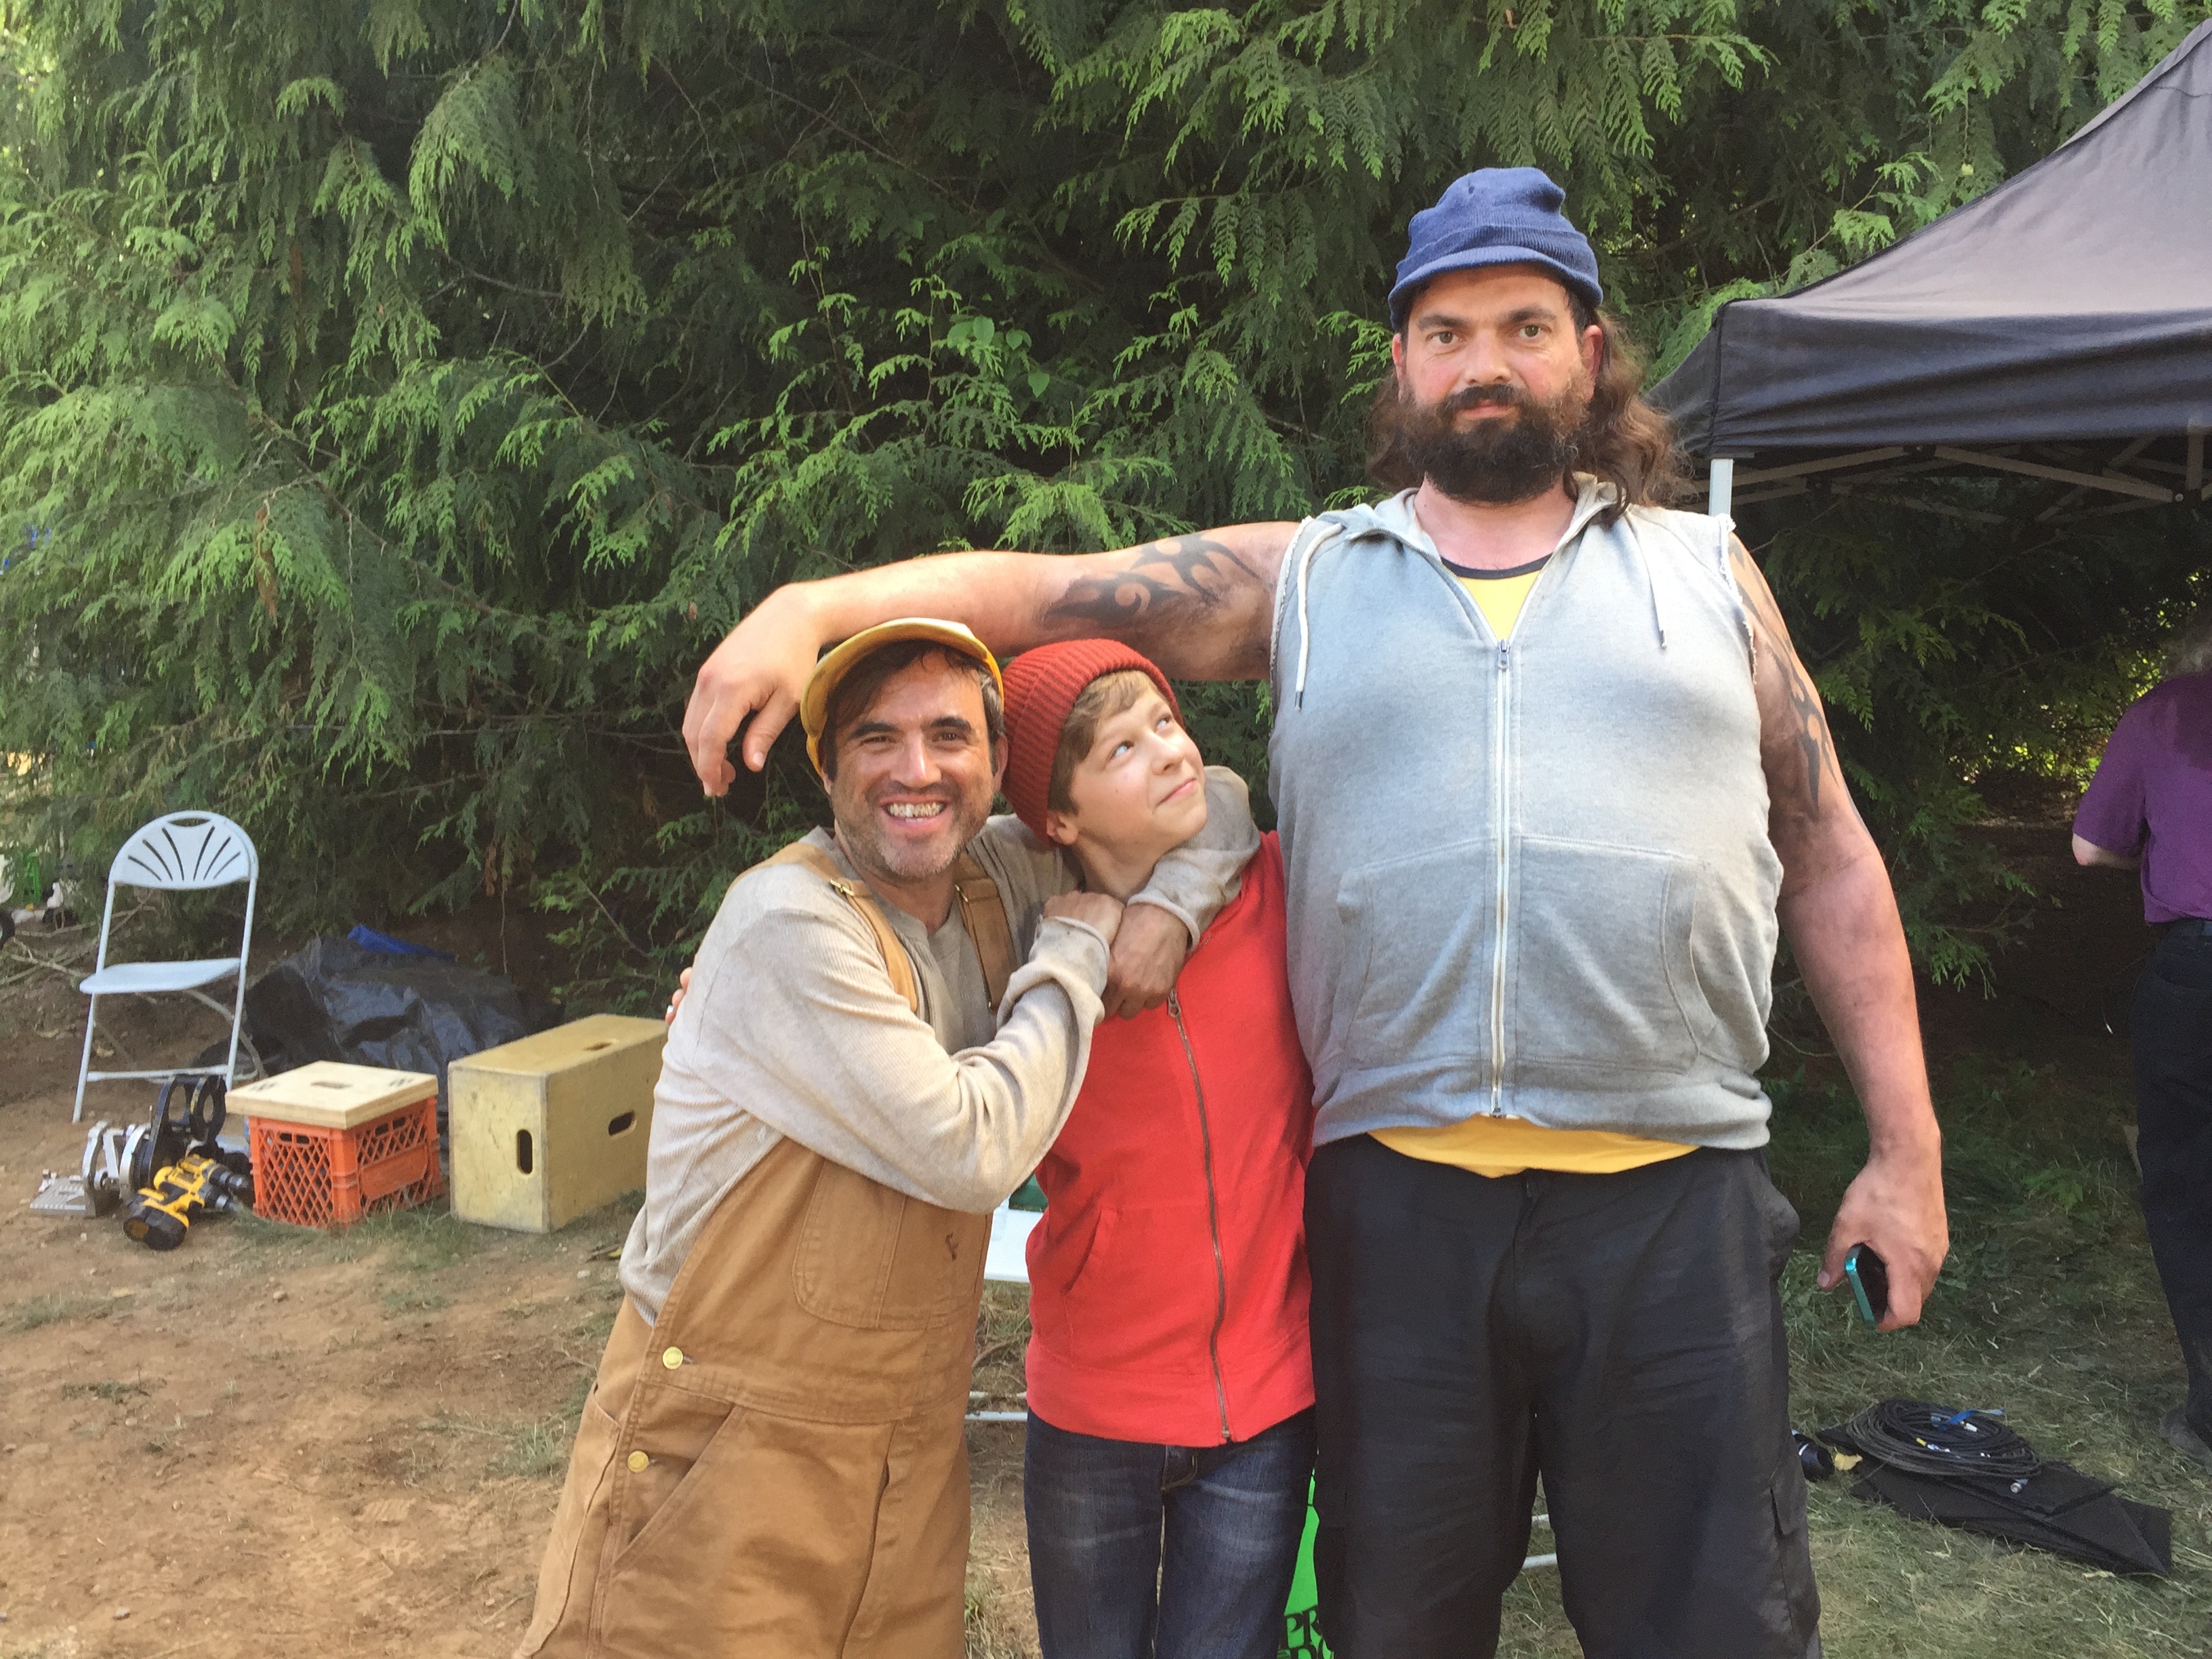 With Gabe Khouth (Buzz) and Peter New (Junior) on the set of Jim Henson's Turkey Hollow.